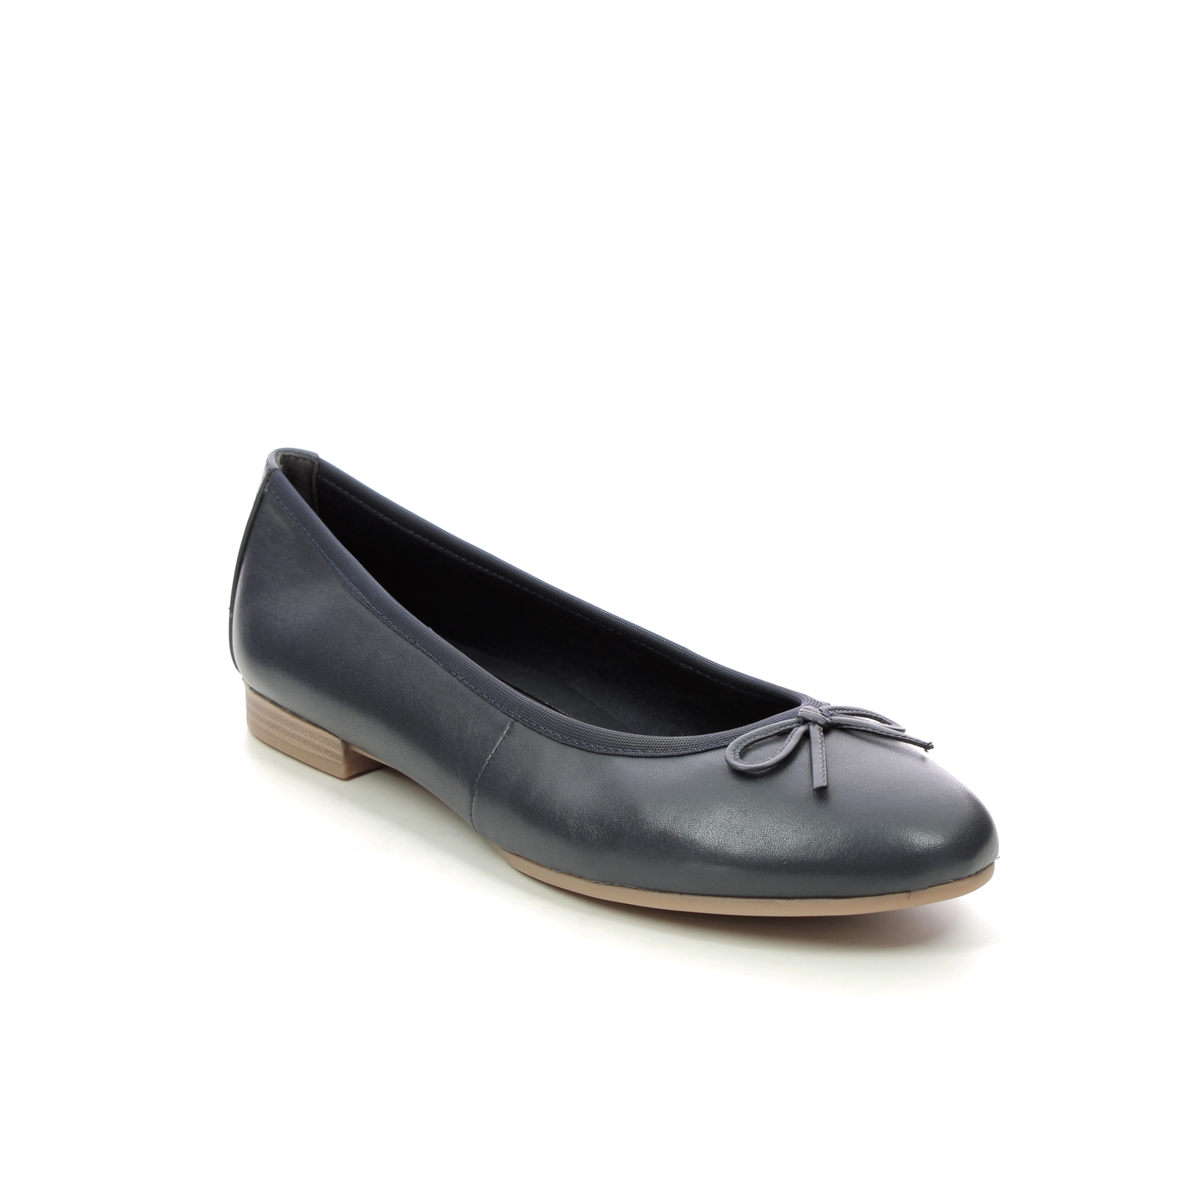 Tamaris Alena Birago Navy Leather Womens pumps 22116-20-805 in a Plain Leather in Size 40